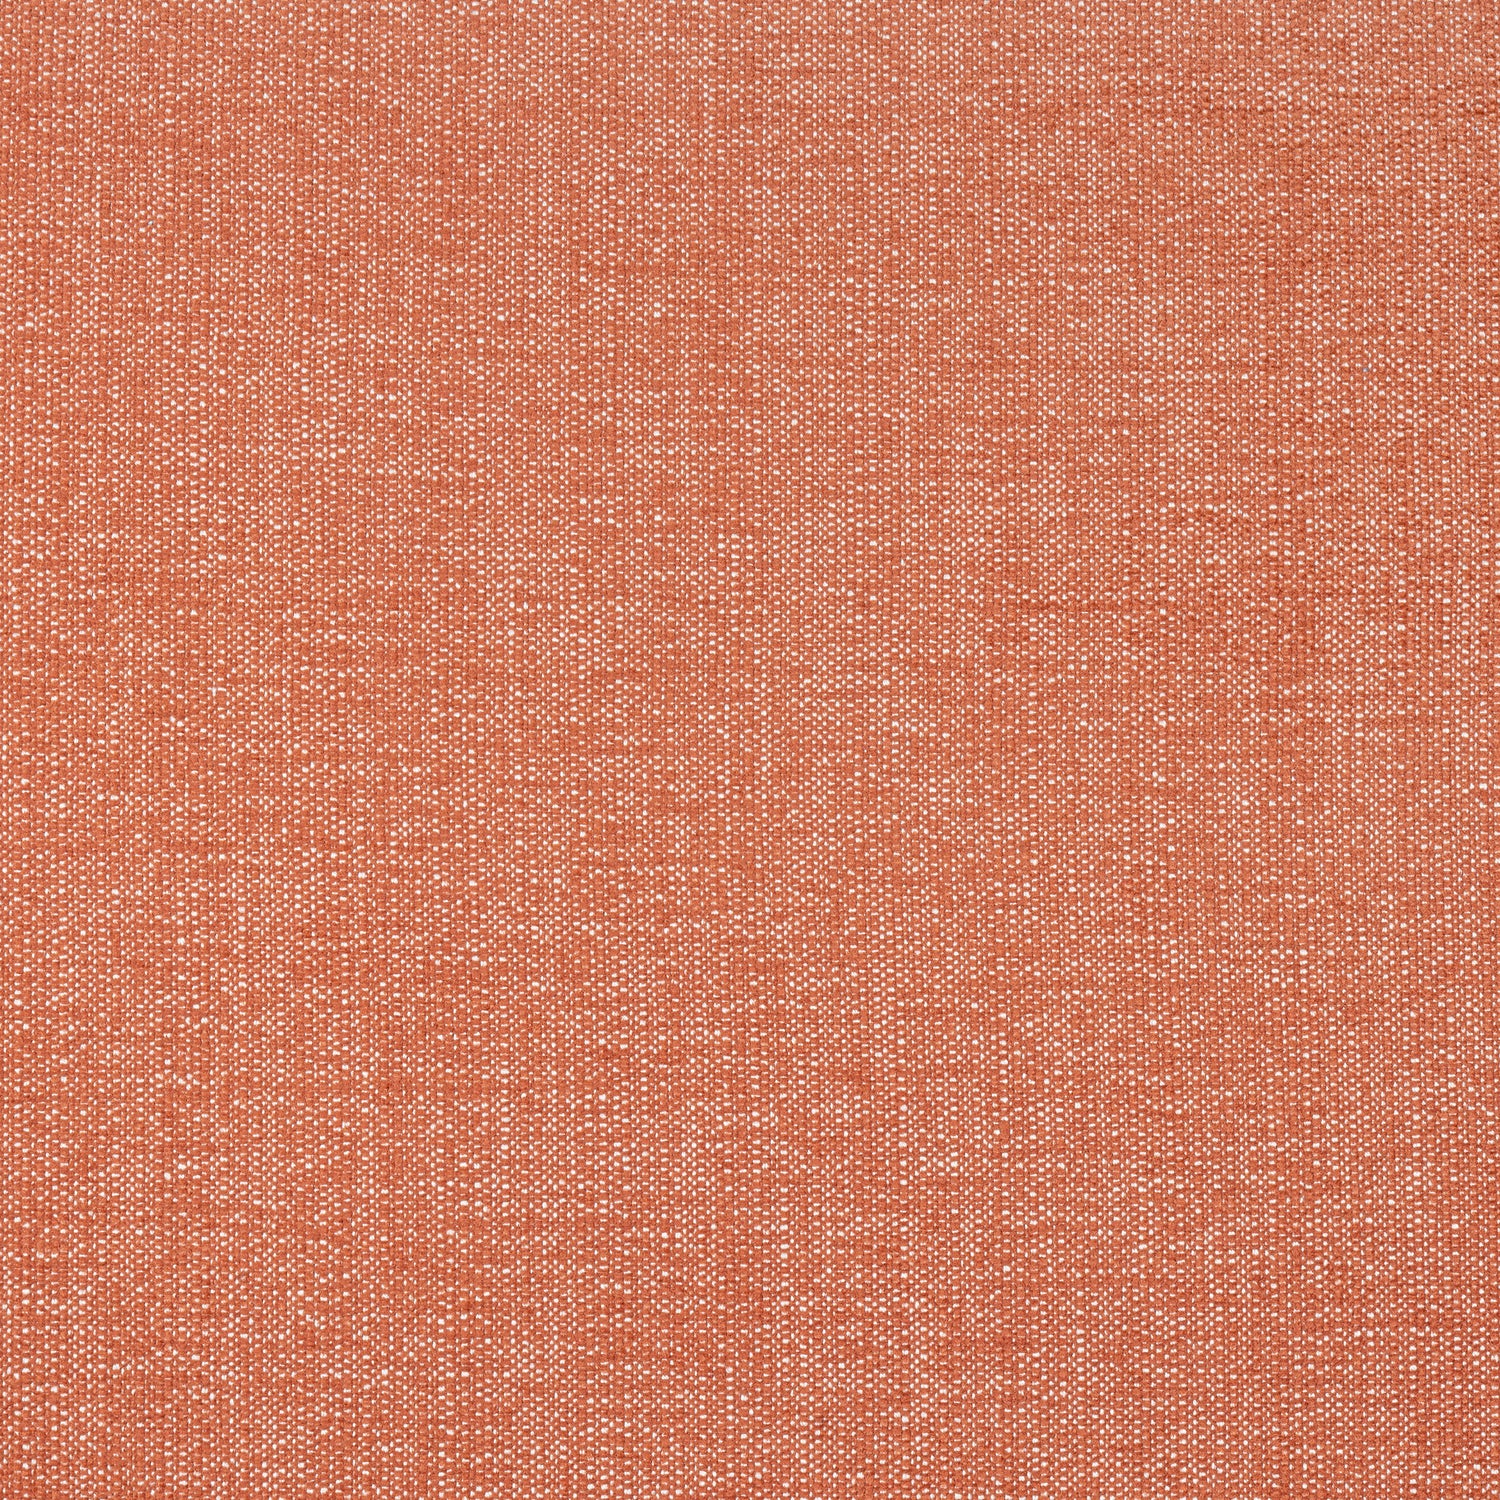 Veda fabric in terracotta color - pattern number W8713 - by Thibaut in the Haven Textures collection